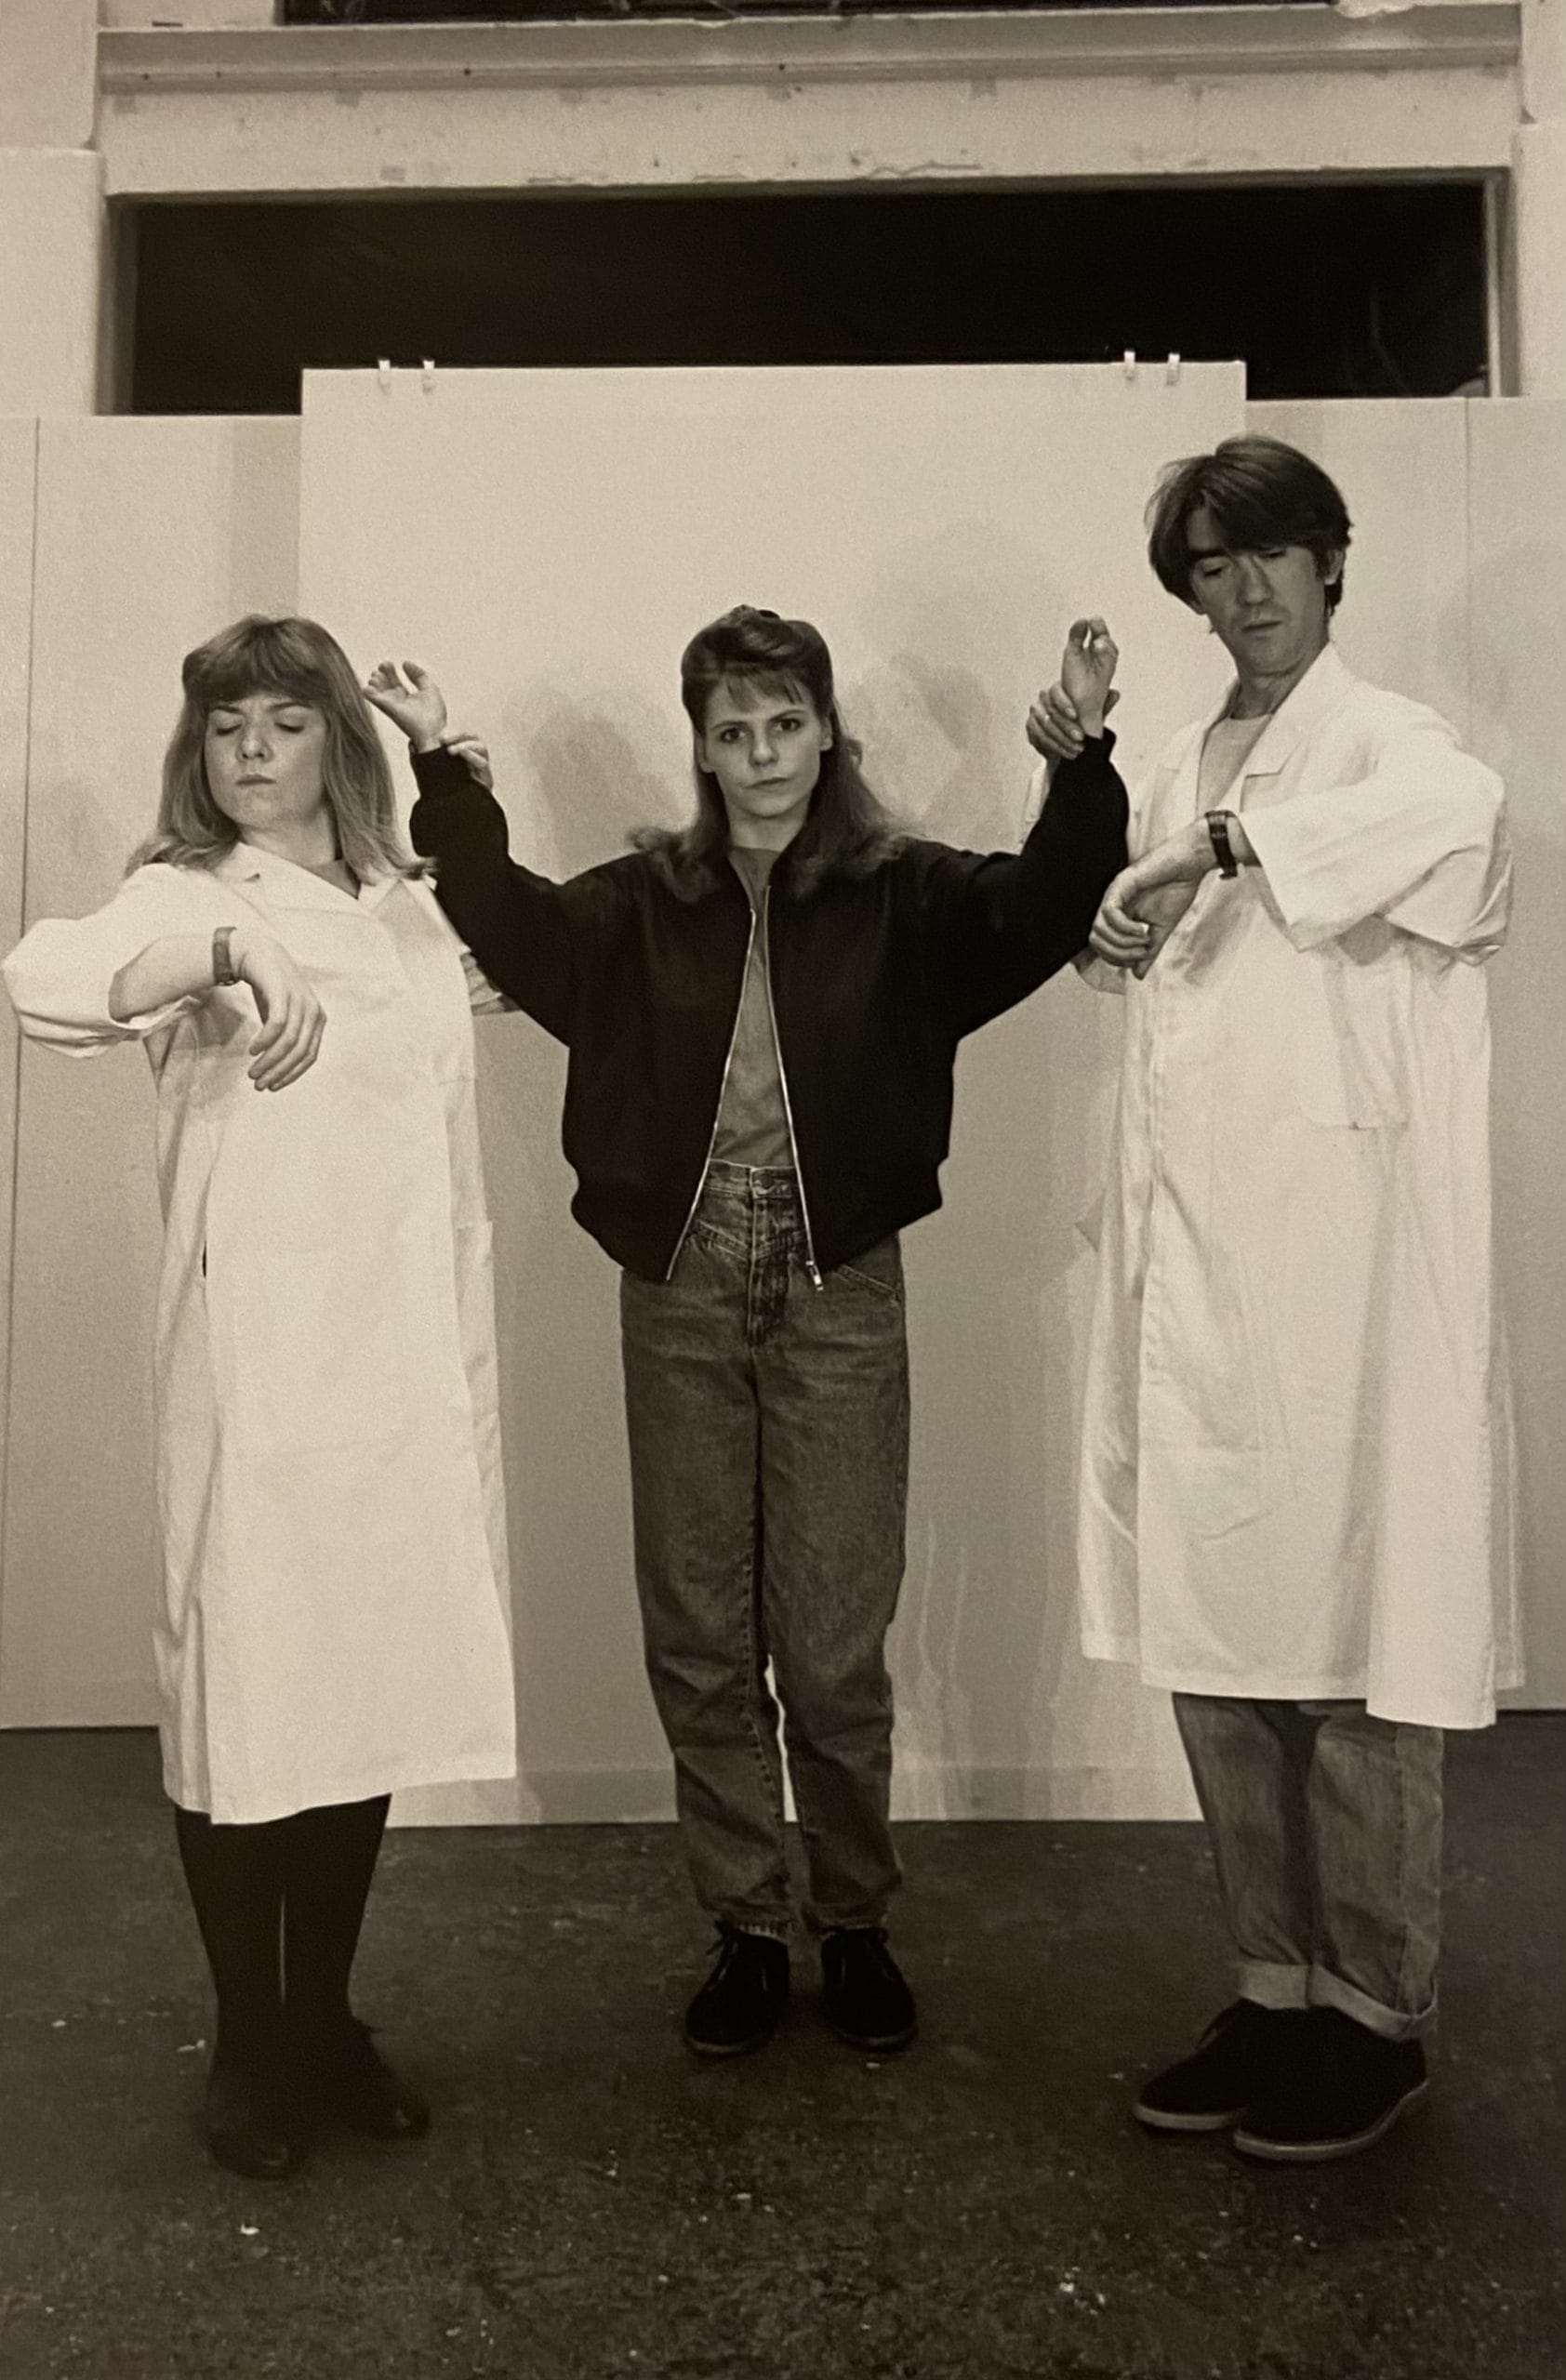 Three performers on stage, two wearing lab coats and looking at their watches. The third stands in the middle with her hands up in the air.